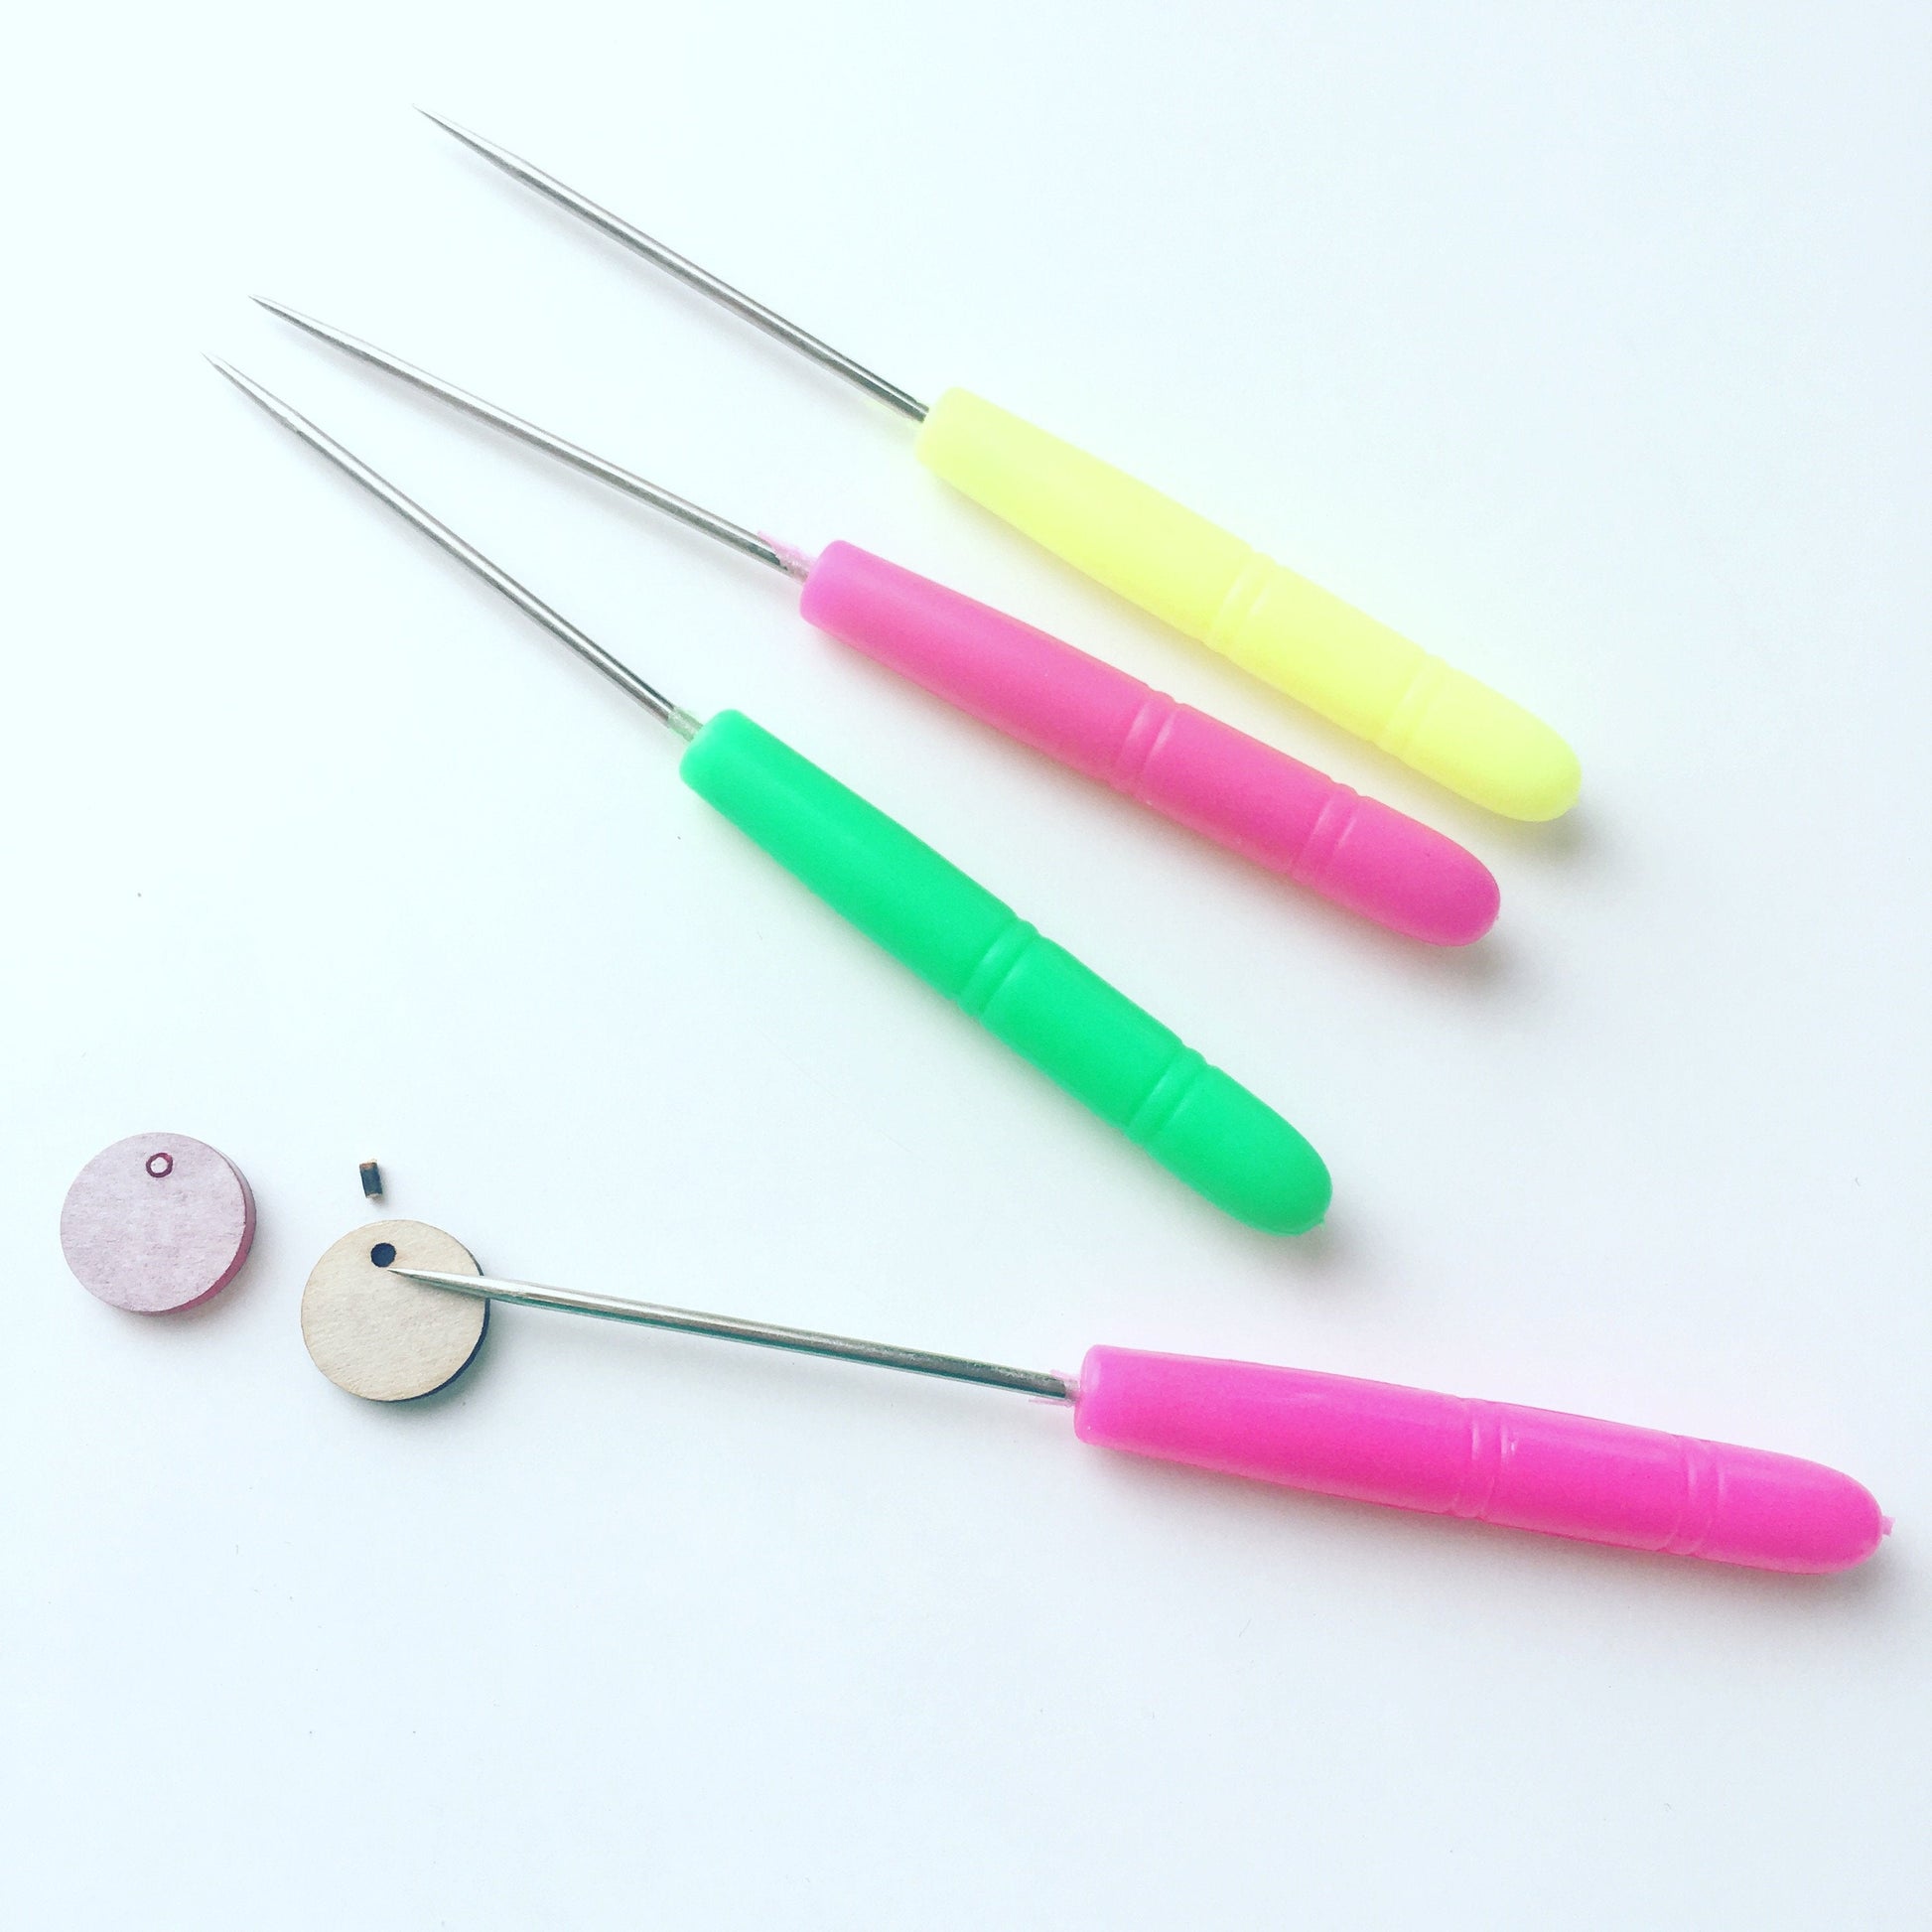 Crafty Cuts Laser Findings Thingamajig - Handy Poking tool!